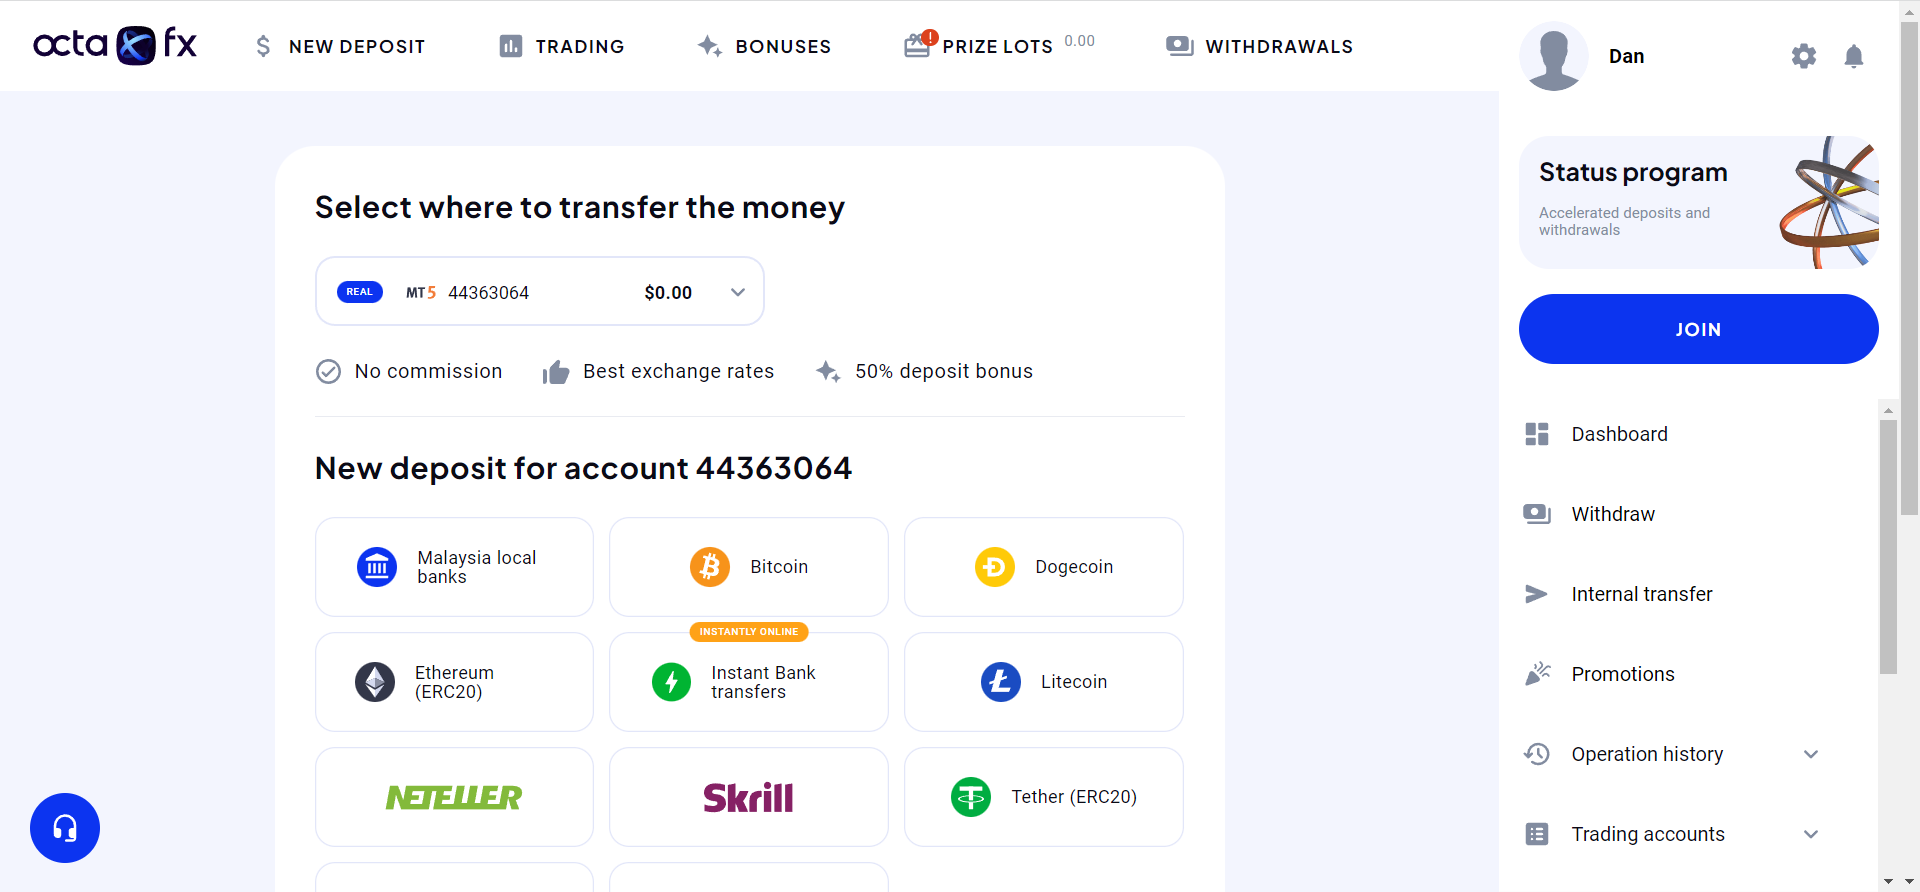 OctaFX Deposits and Withdrawals